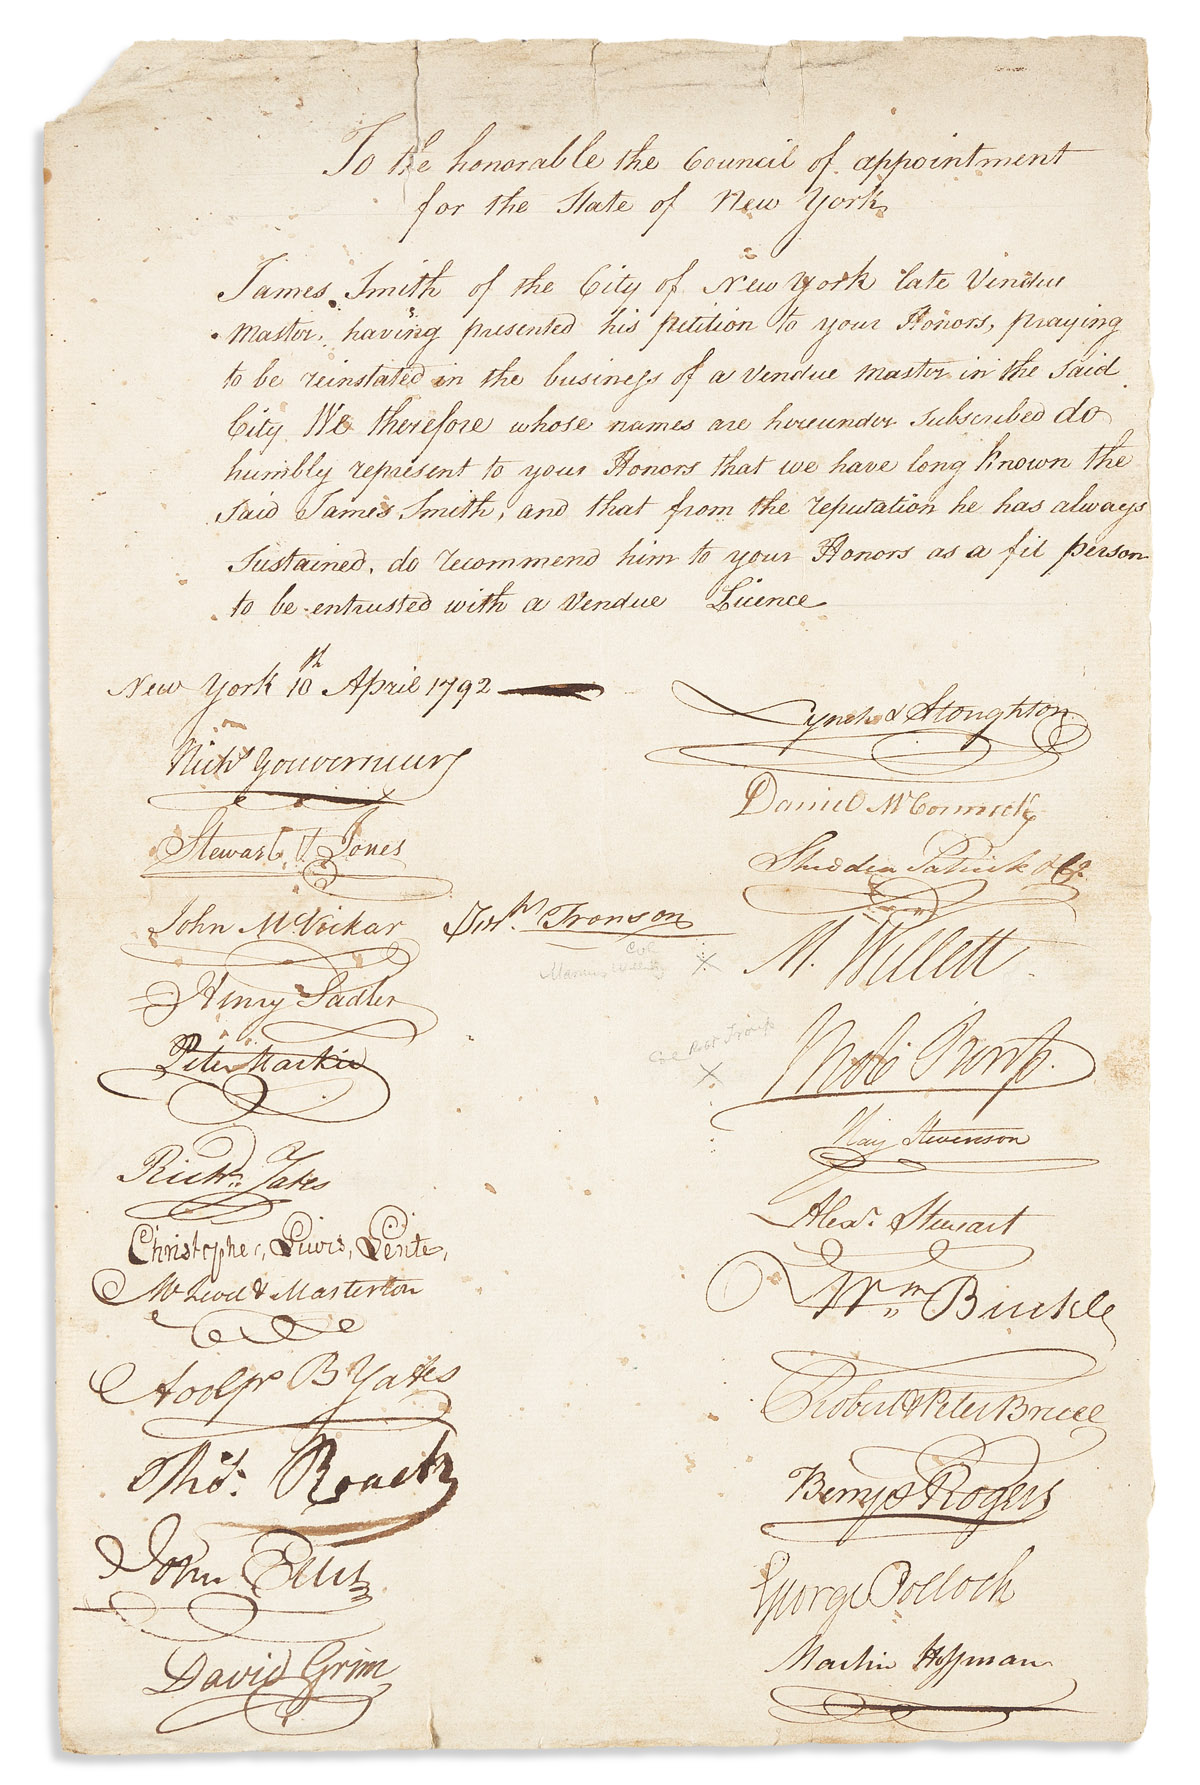 WILLETT, MARINUS. Signature, M. Willett, on a petition to the Council of Appointment for the State of NY, attesting to the character